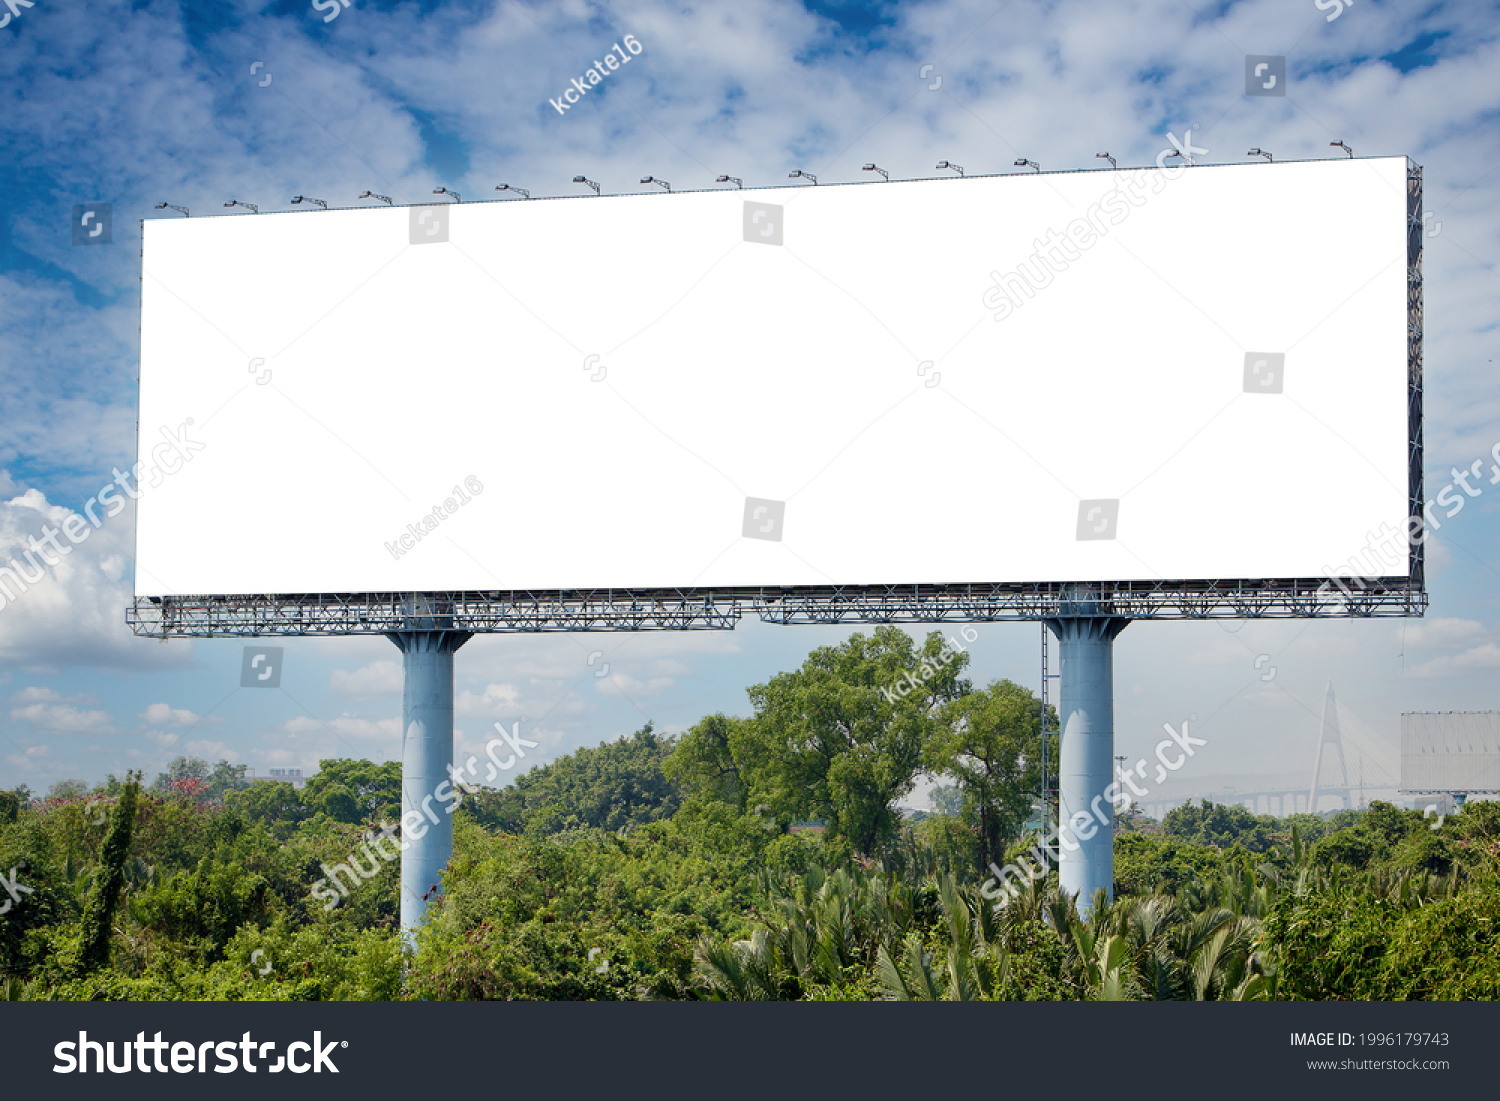 blank billboard on the sideway in the park. image for copy space, advertisement, text and object. white billboard in natural green. #1996179743